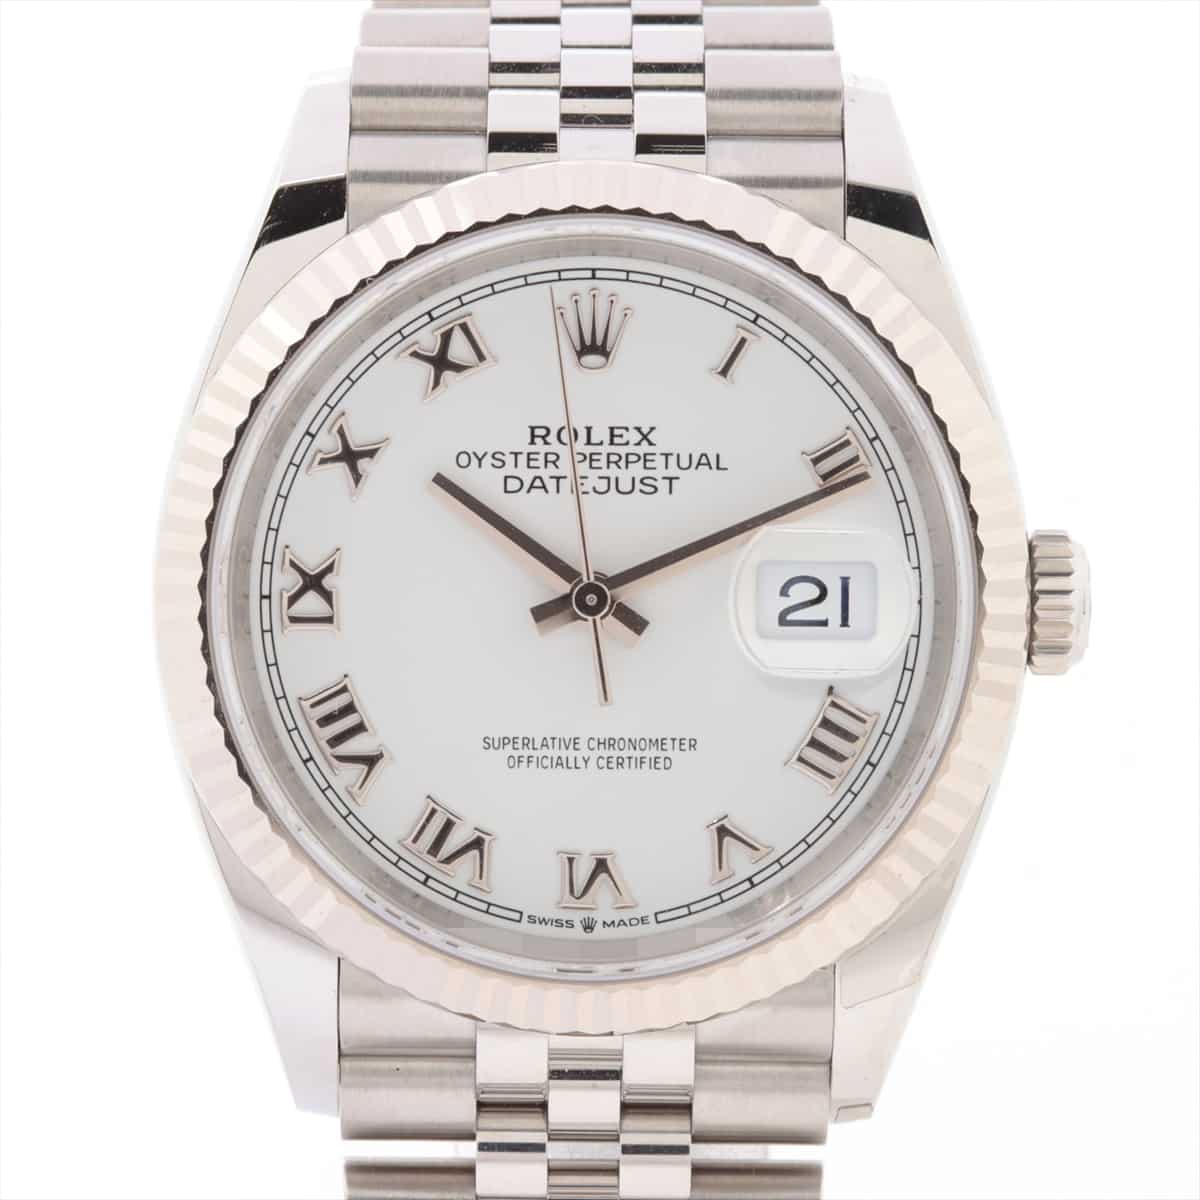 Rolex Datejust 126234 SS×WG AT White-Face links 7